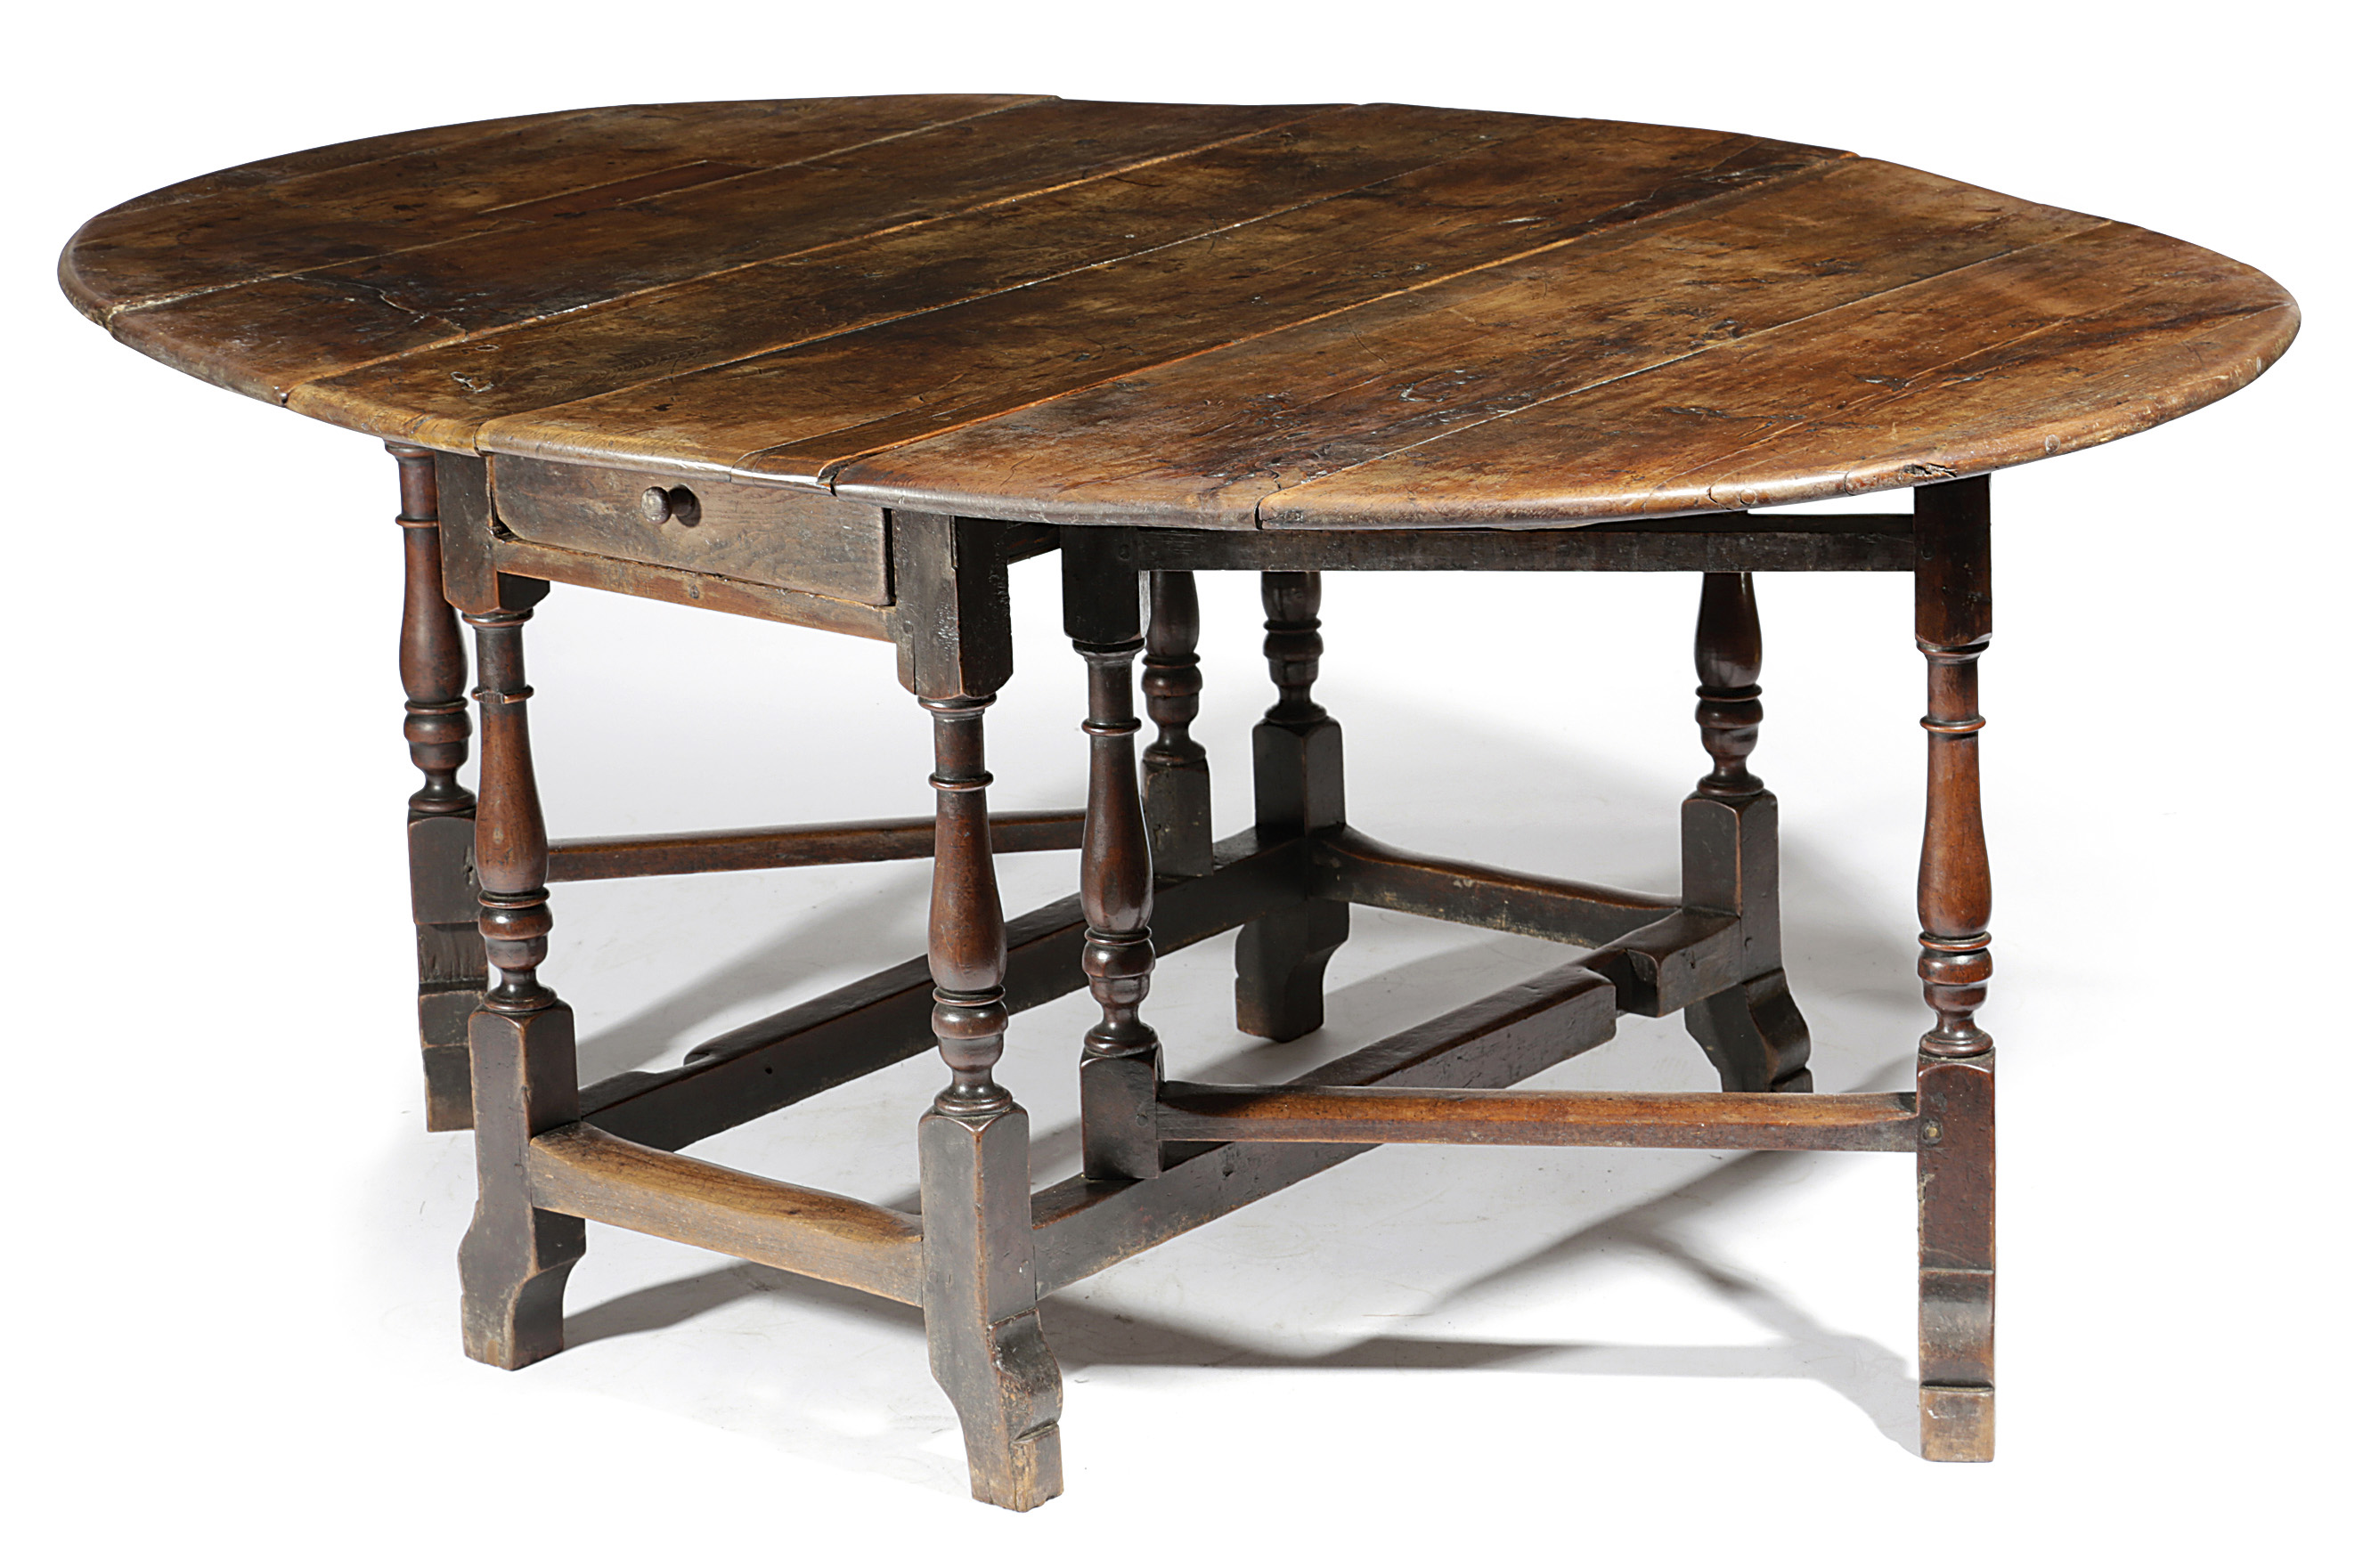 A WILLIAM AND MARY YEW GATELEG DINING TABLE LATE 17TH / EARLY 18TH CENTURY the oval drop-leaf top on